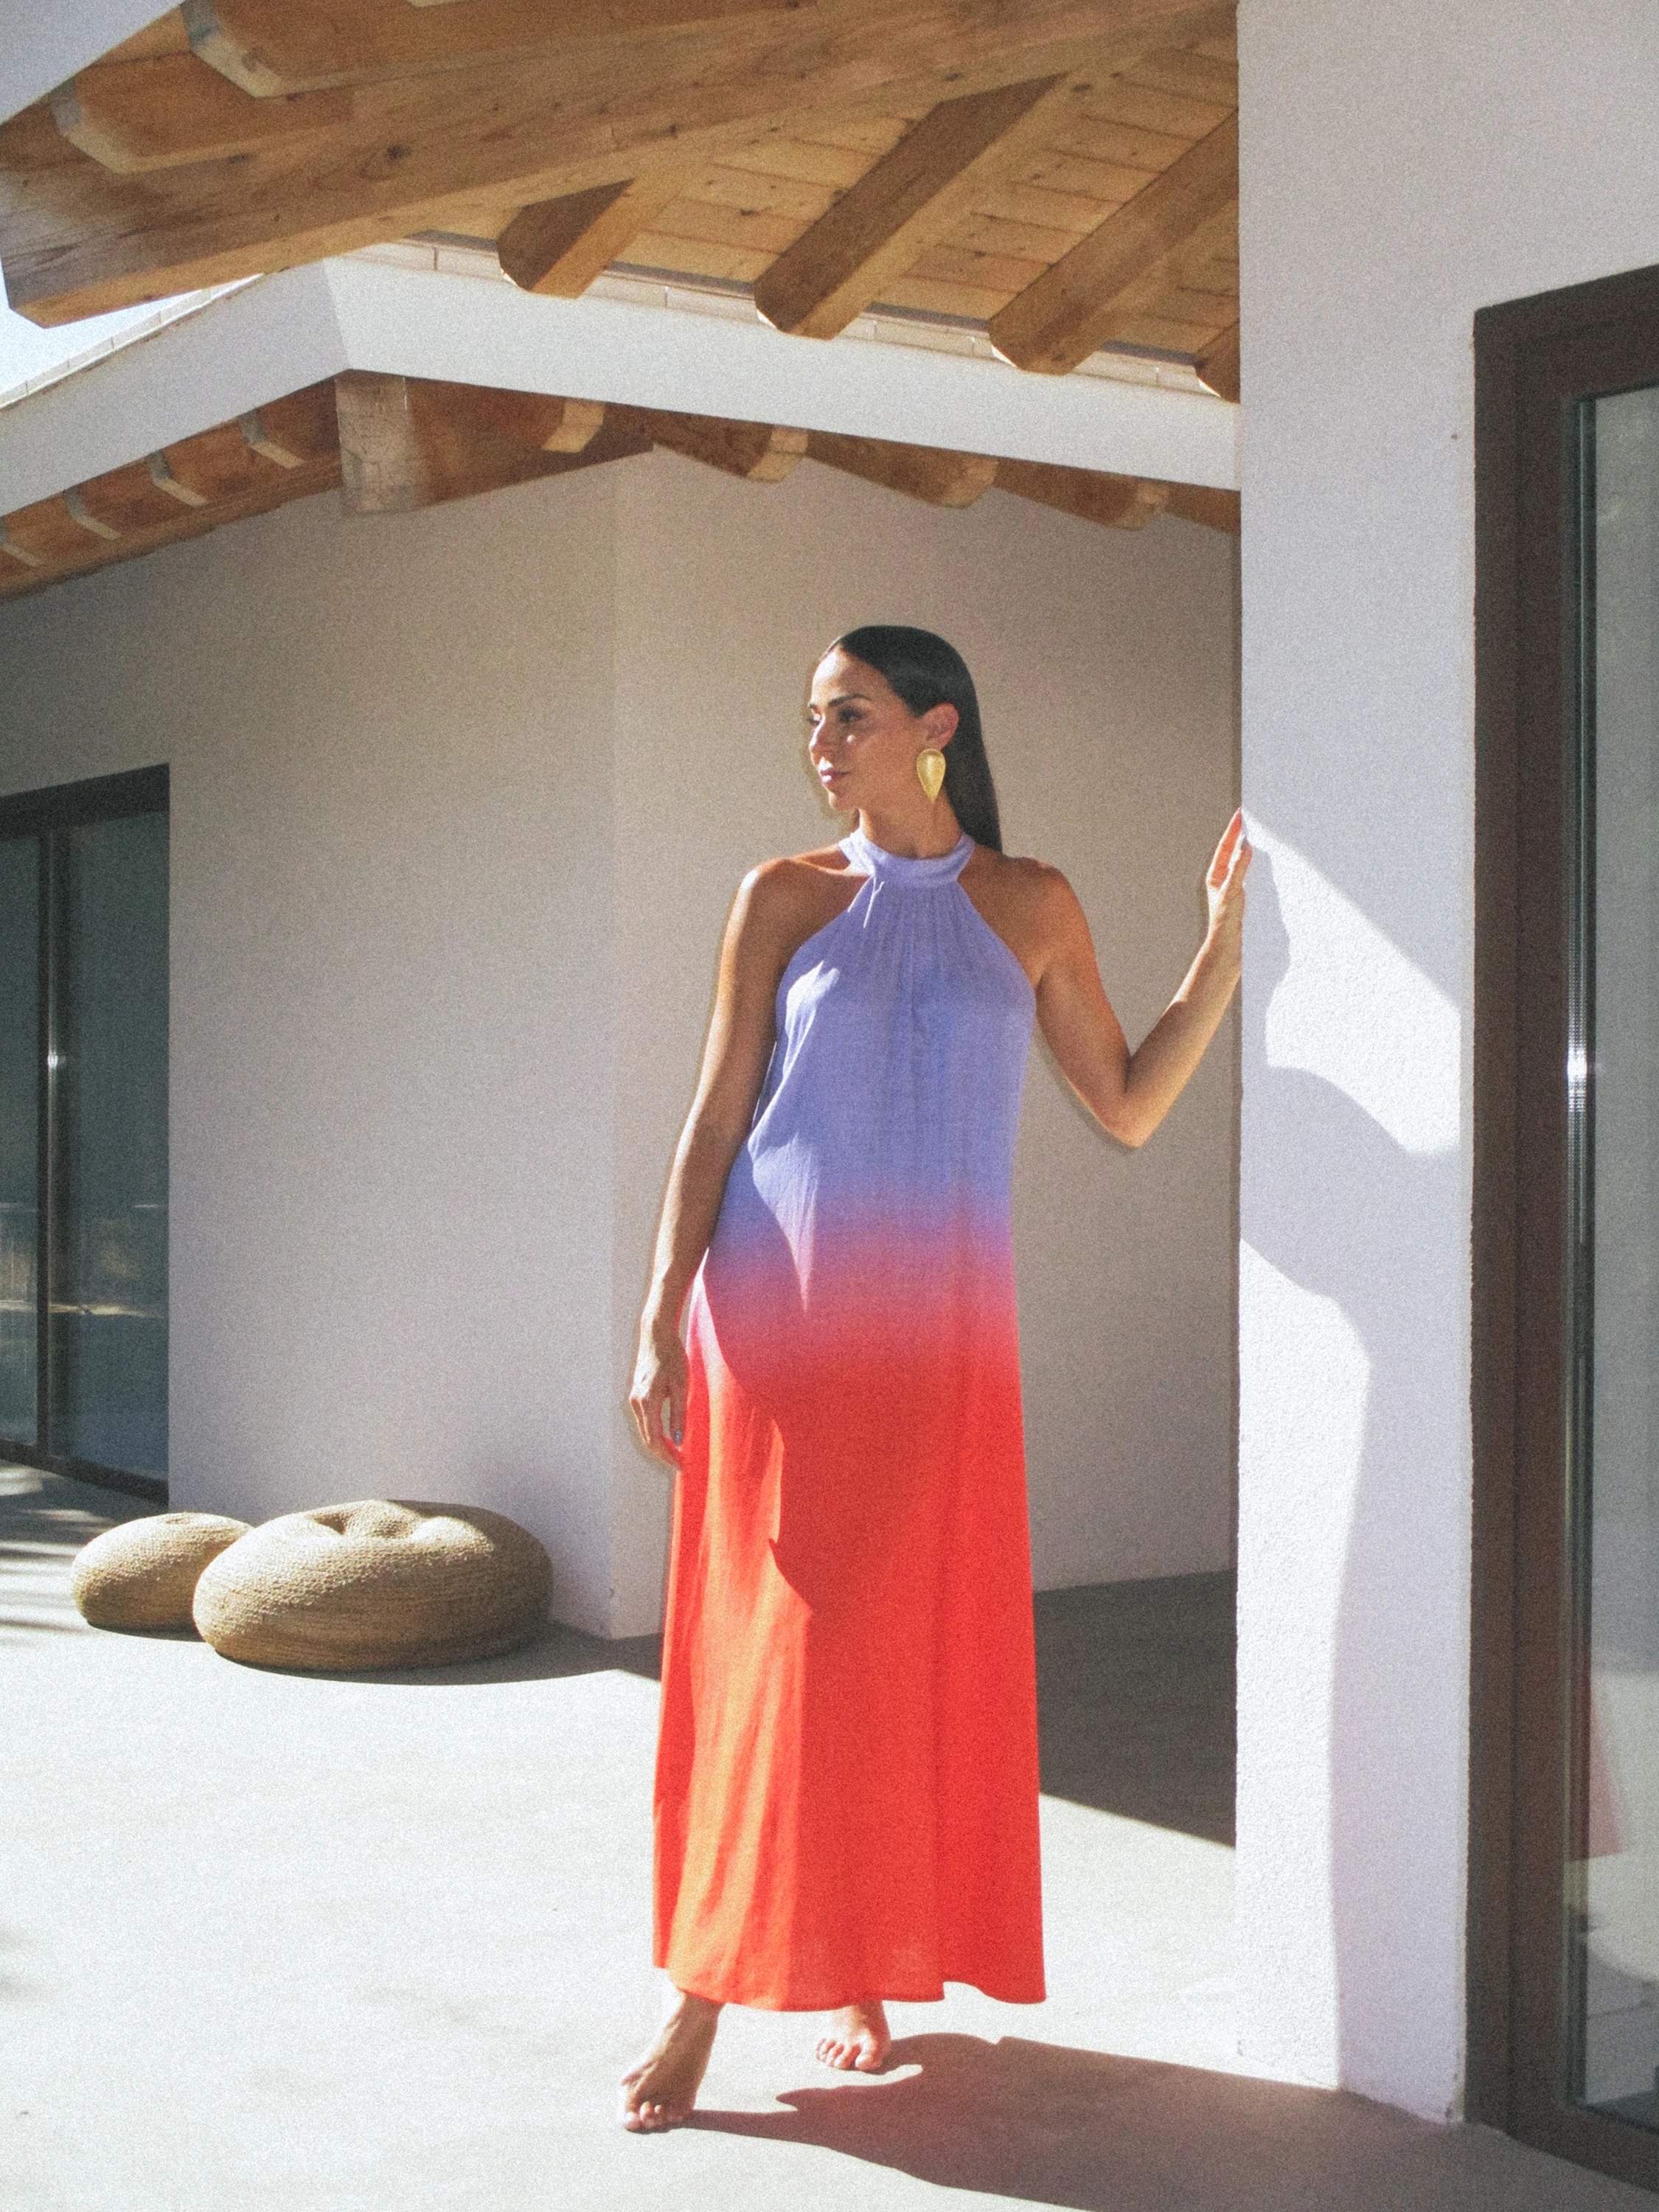 Sienna and Vanessa Martins join forces in a breathtaking collaboration, weaving together a tale of sophistication through a captivating capsule collection of long gradient dresses.